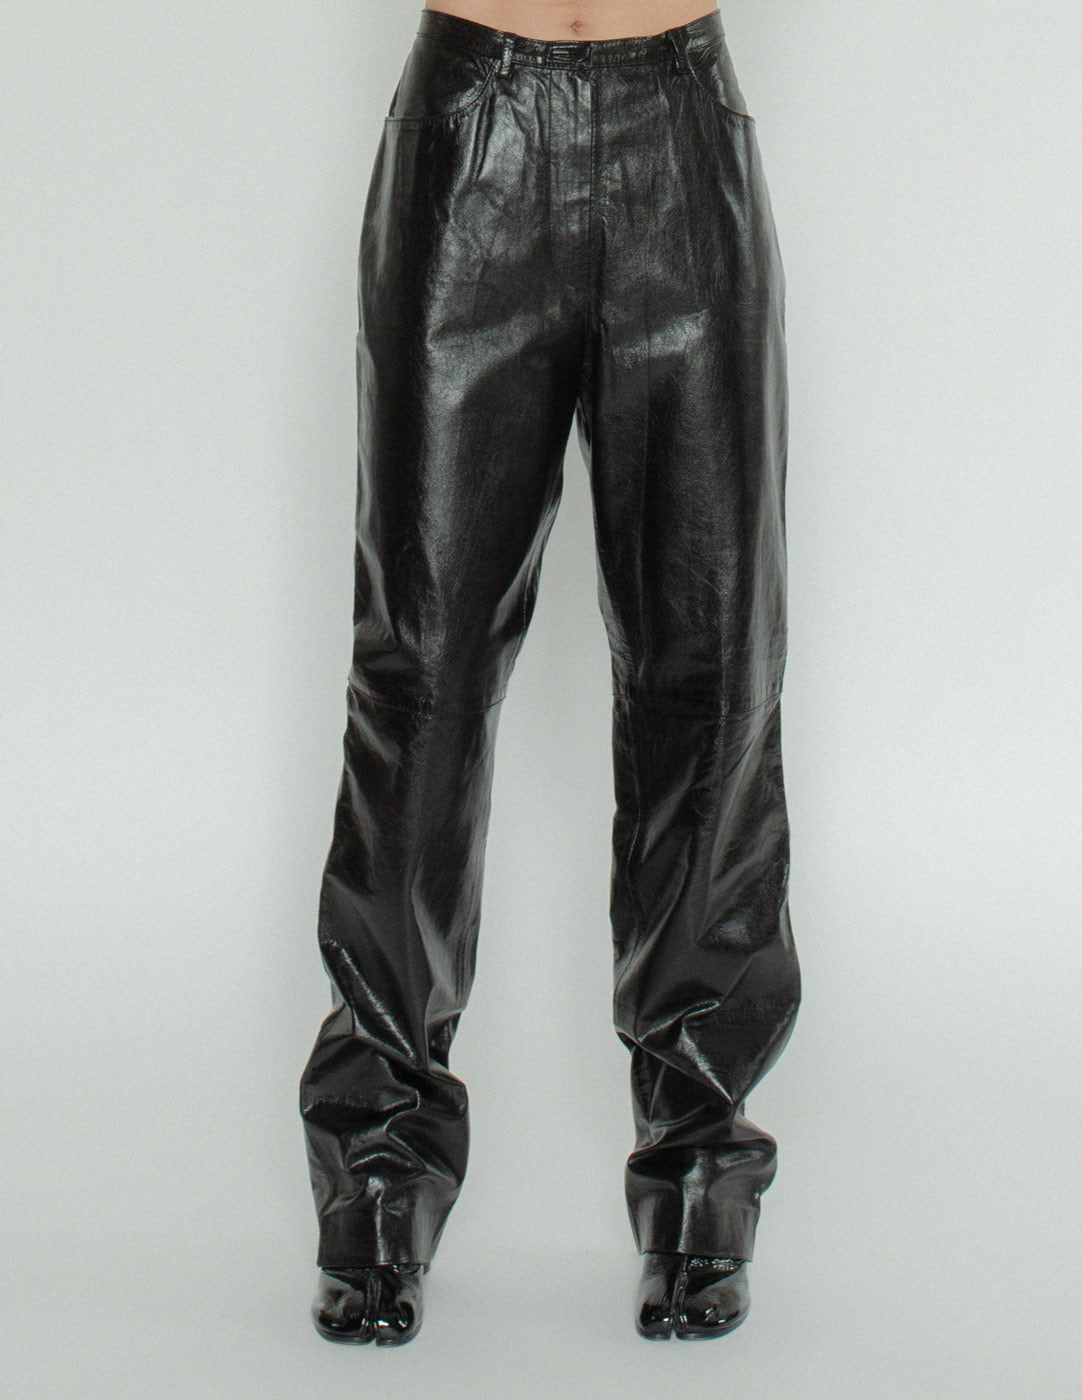 Missoni black leather trousers front detail